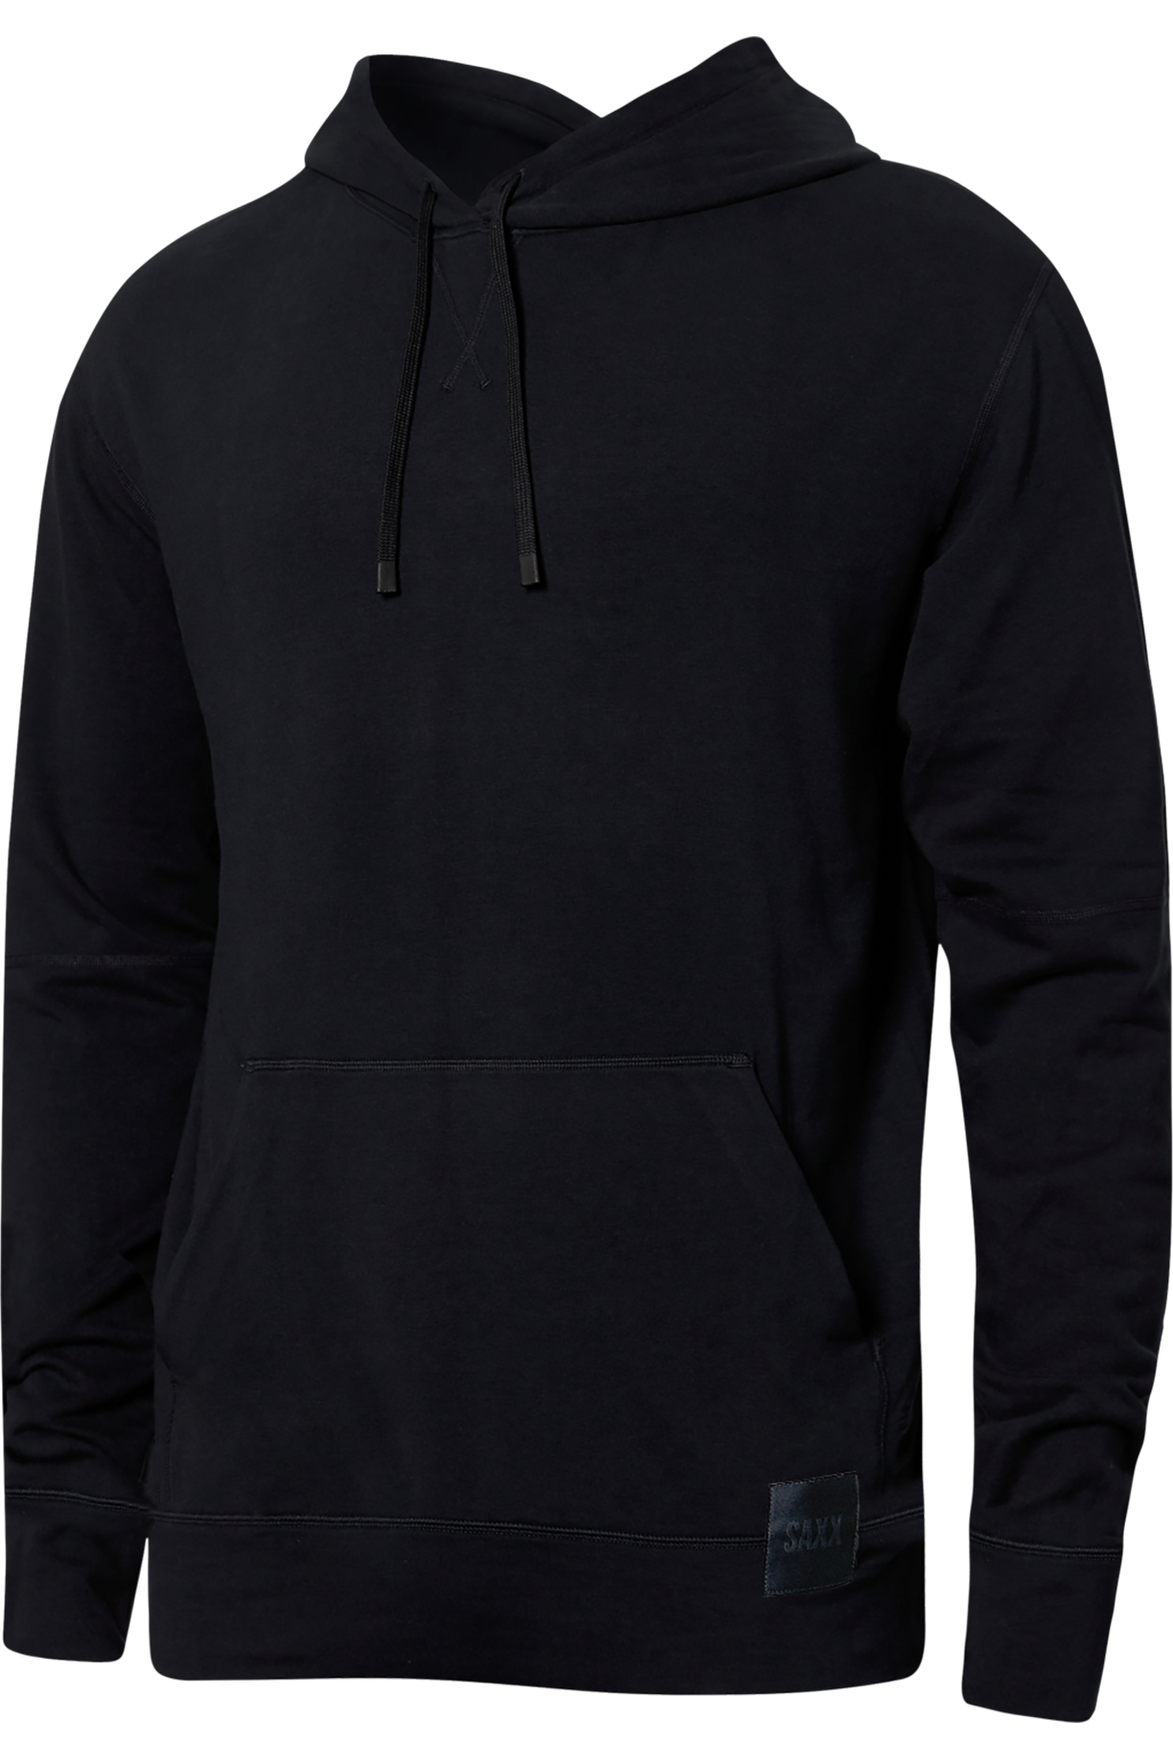 Saxx 3Six Five Hoodie - Style SXLH37 BLK, front